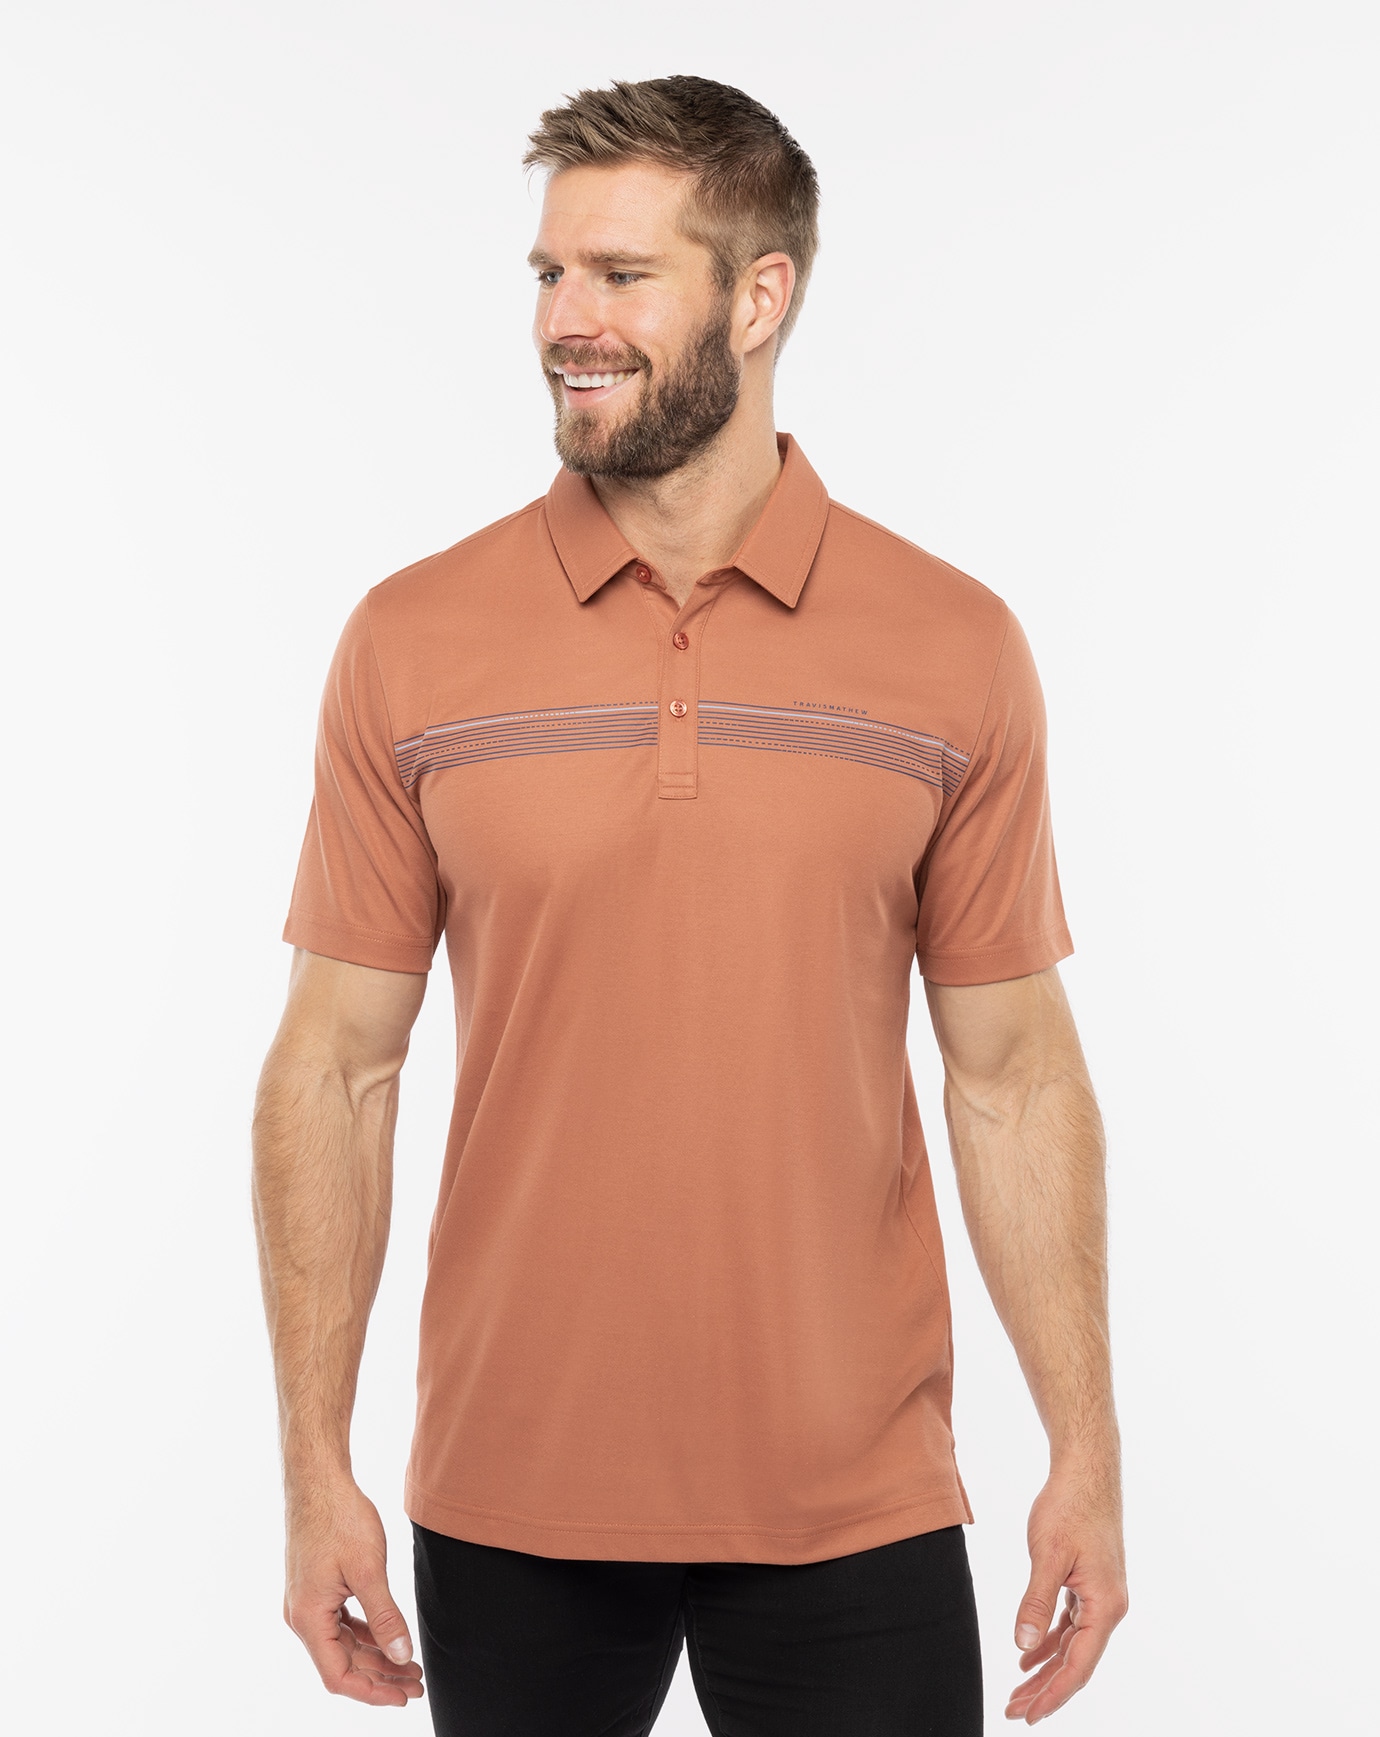 Related Product - DRY DOCK POLO